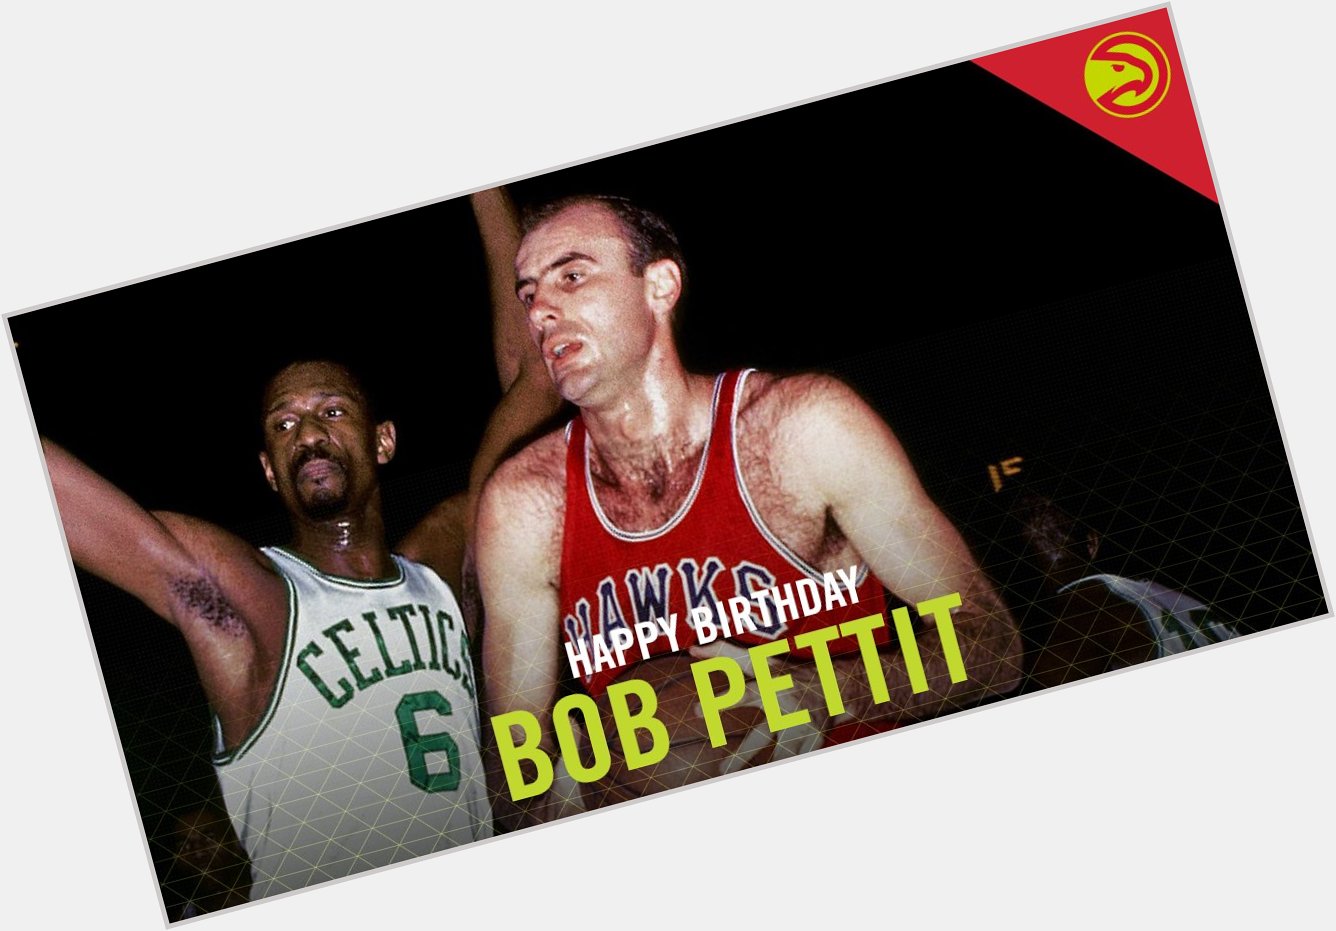 REmessage to join us in wishing the legend Bob Pettit a Happy Birthday today! 